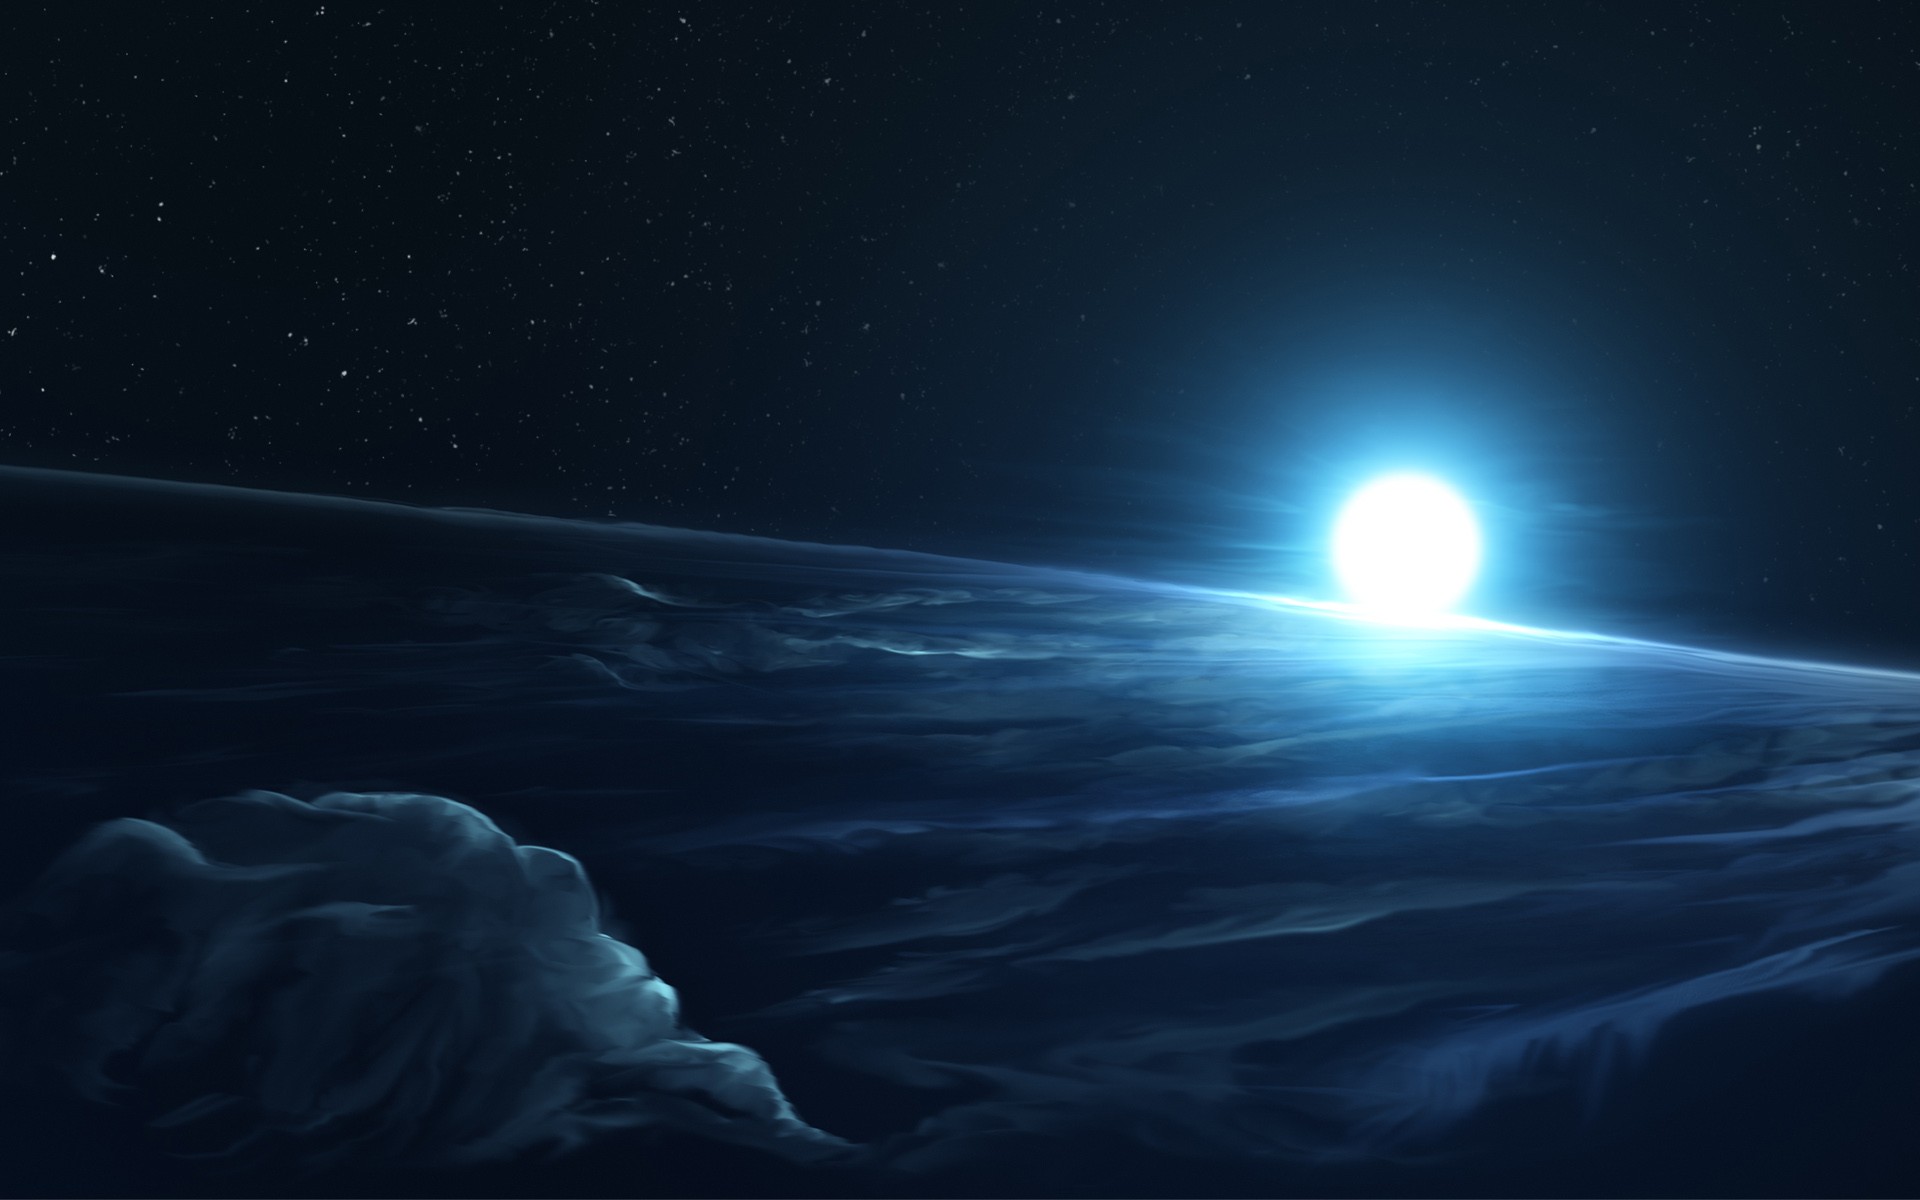 Creative Cold Space HD Wallpaper New